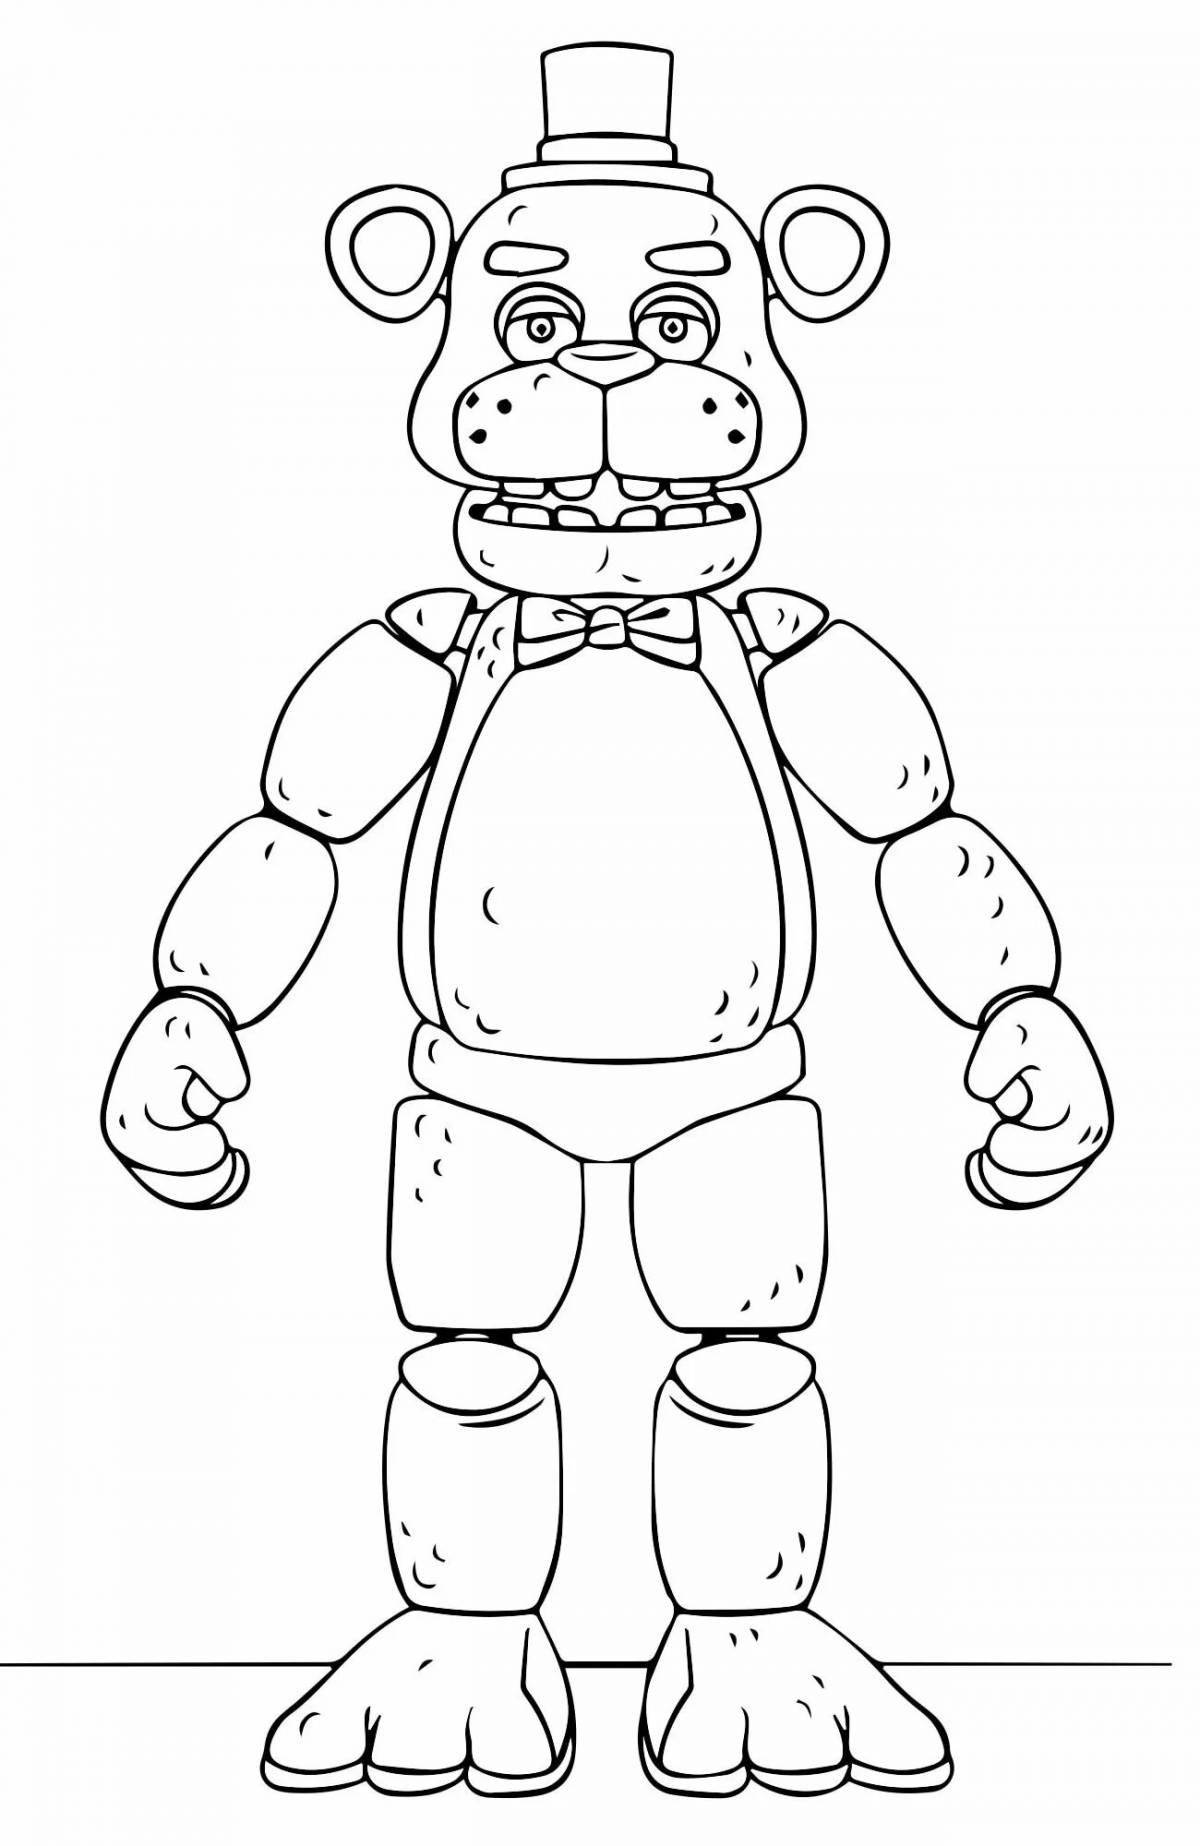 Glittering animatronic seal coloring page